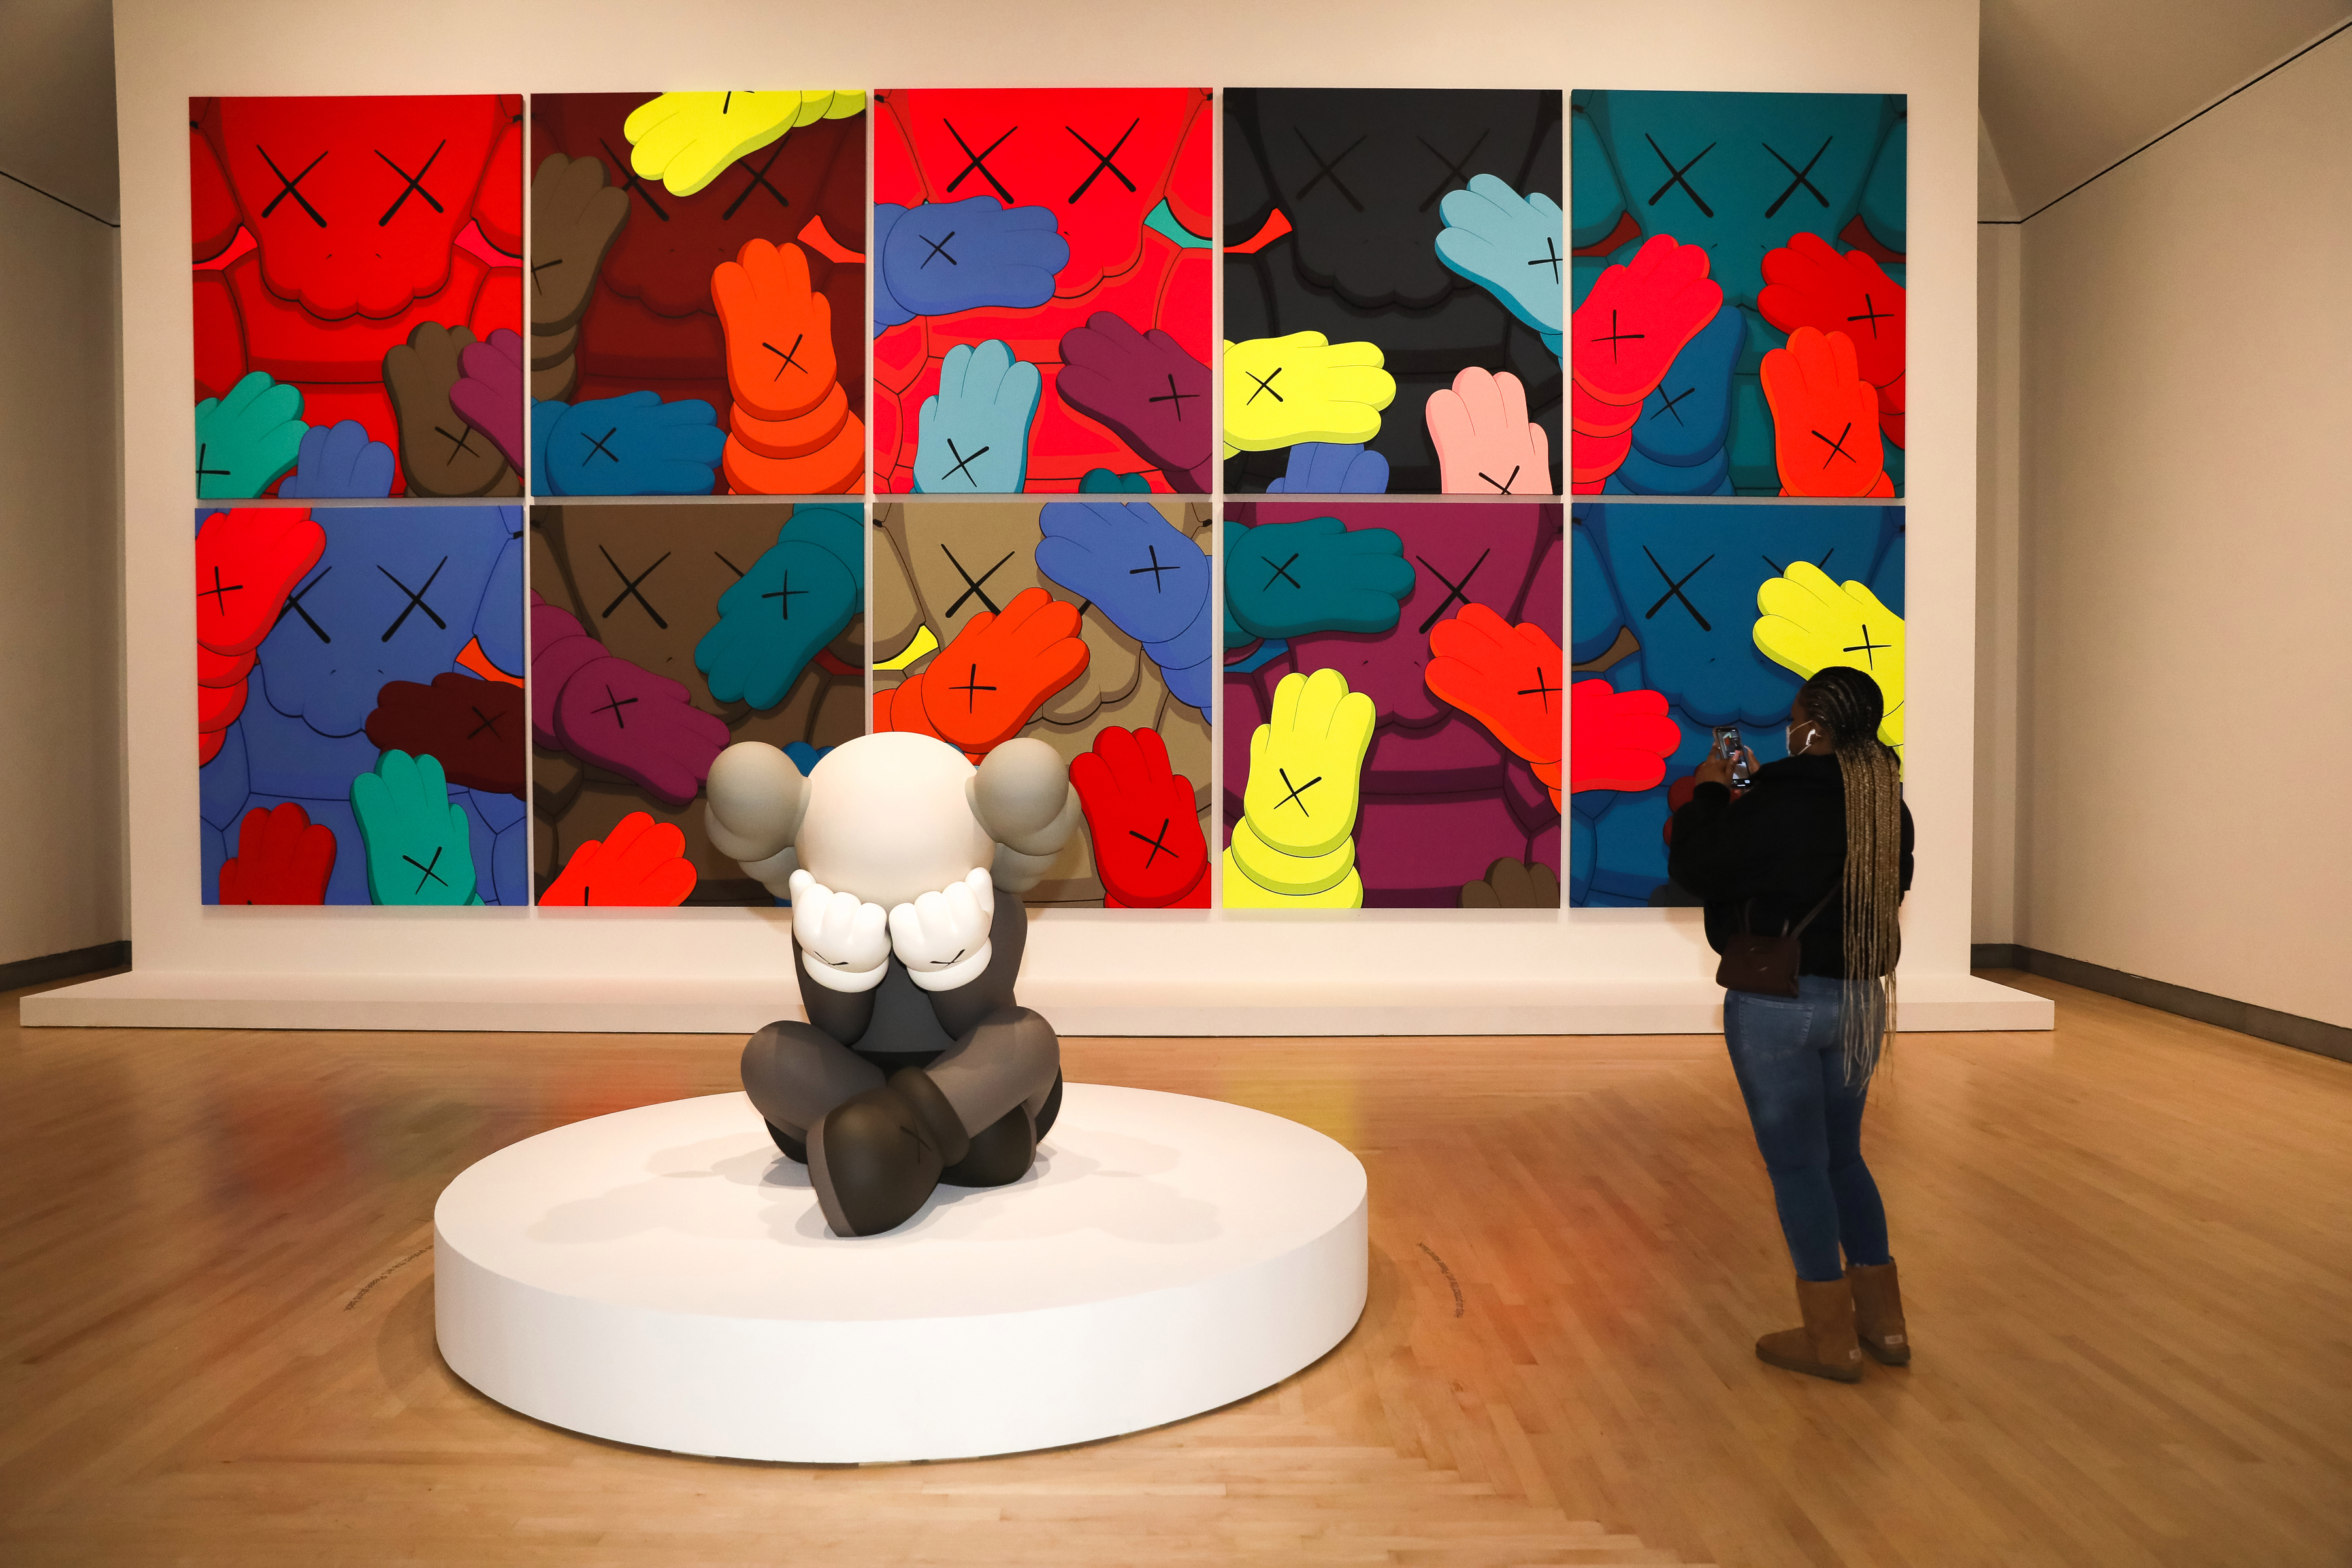 Installation view of "Kaws: What Party" at Brooklyn Museum.